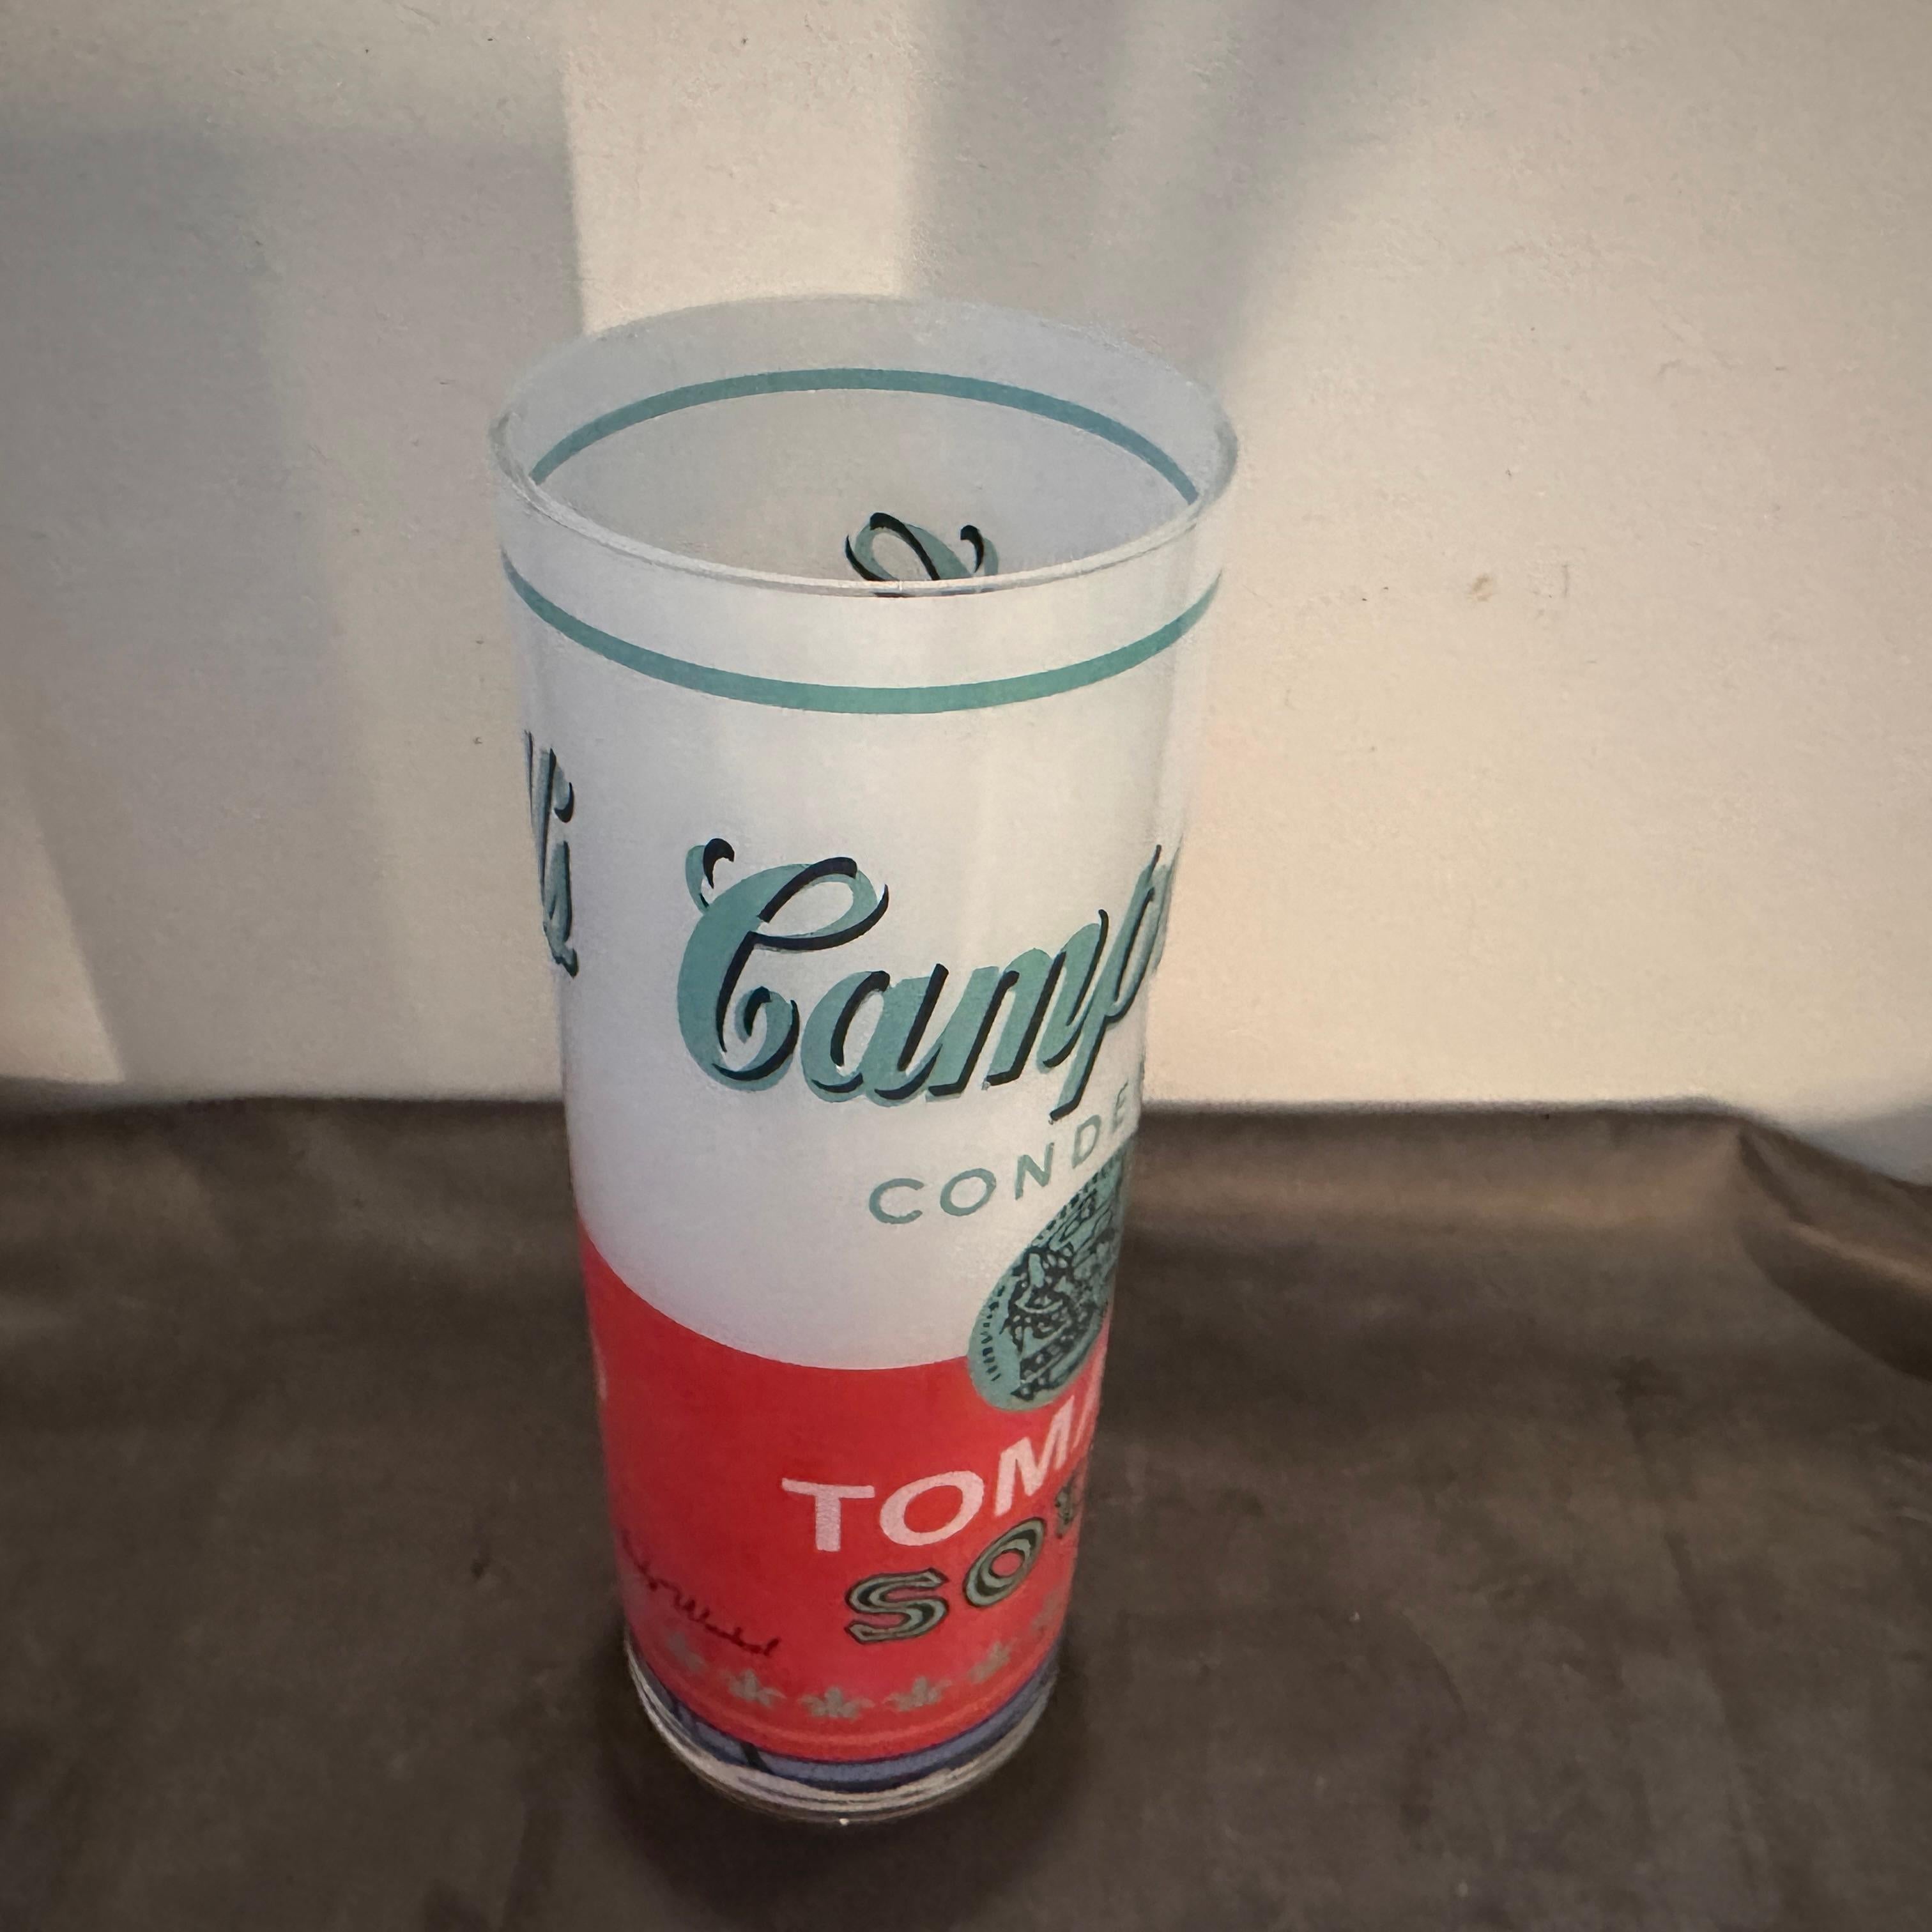 1990s Campbell Soup Glass Vase by Rosenthal Designed by Andy Warhol 1